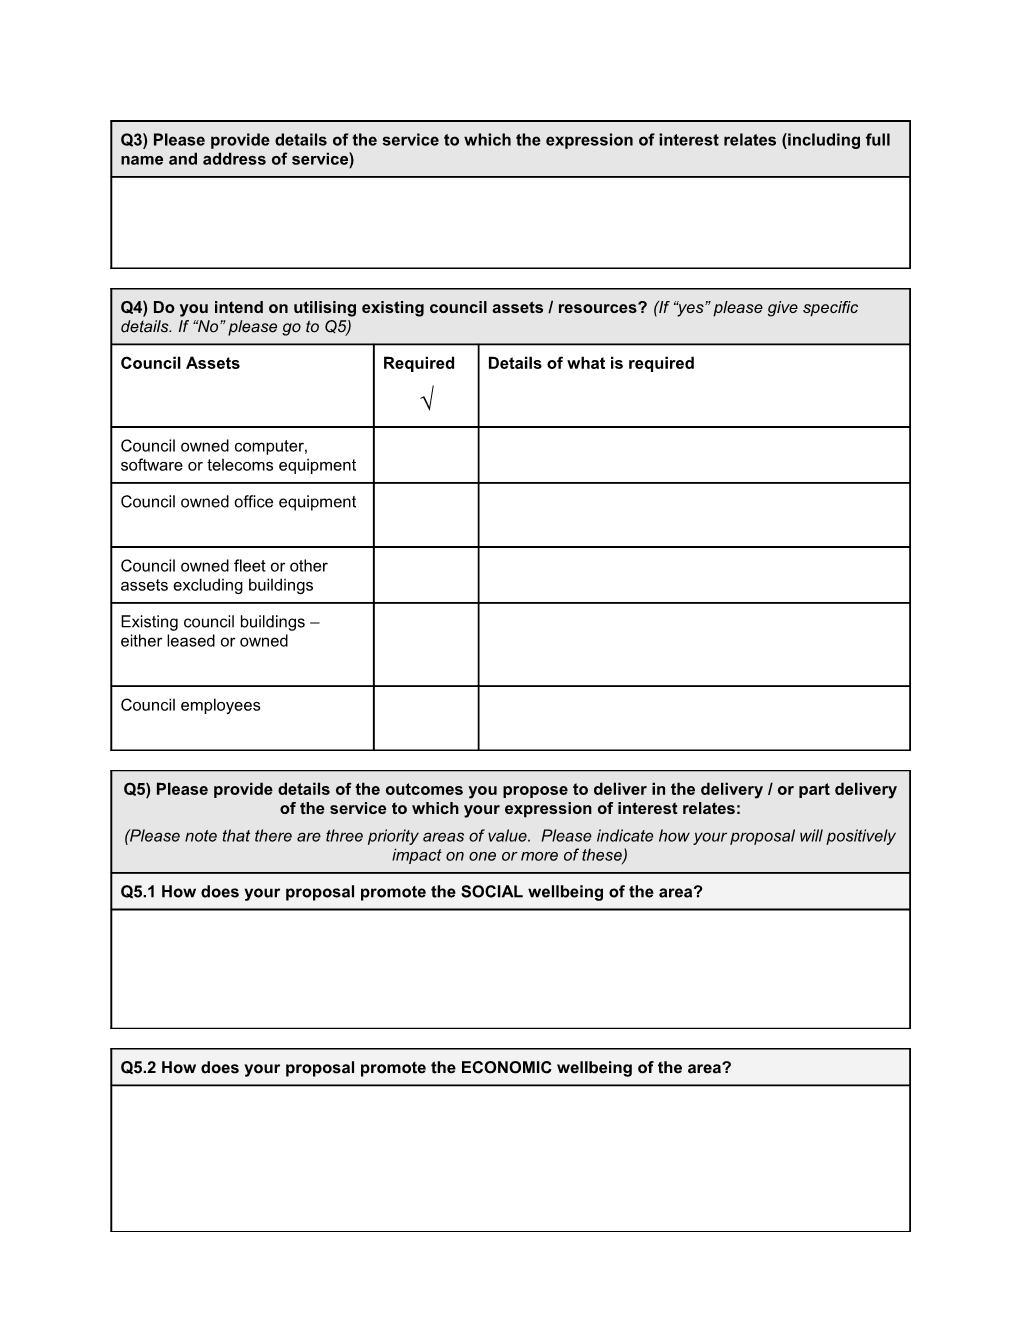 Please Refer to the Expression of Interest Guidance Document for Support on Completing This Form